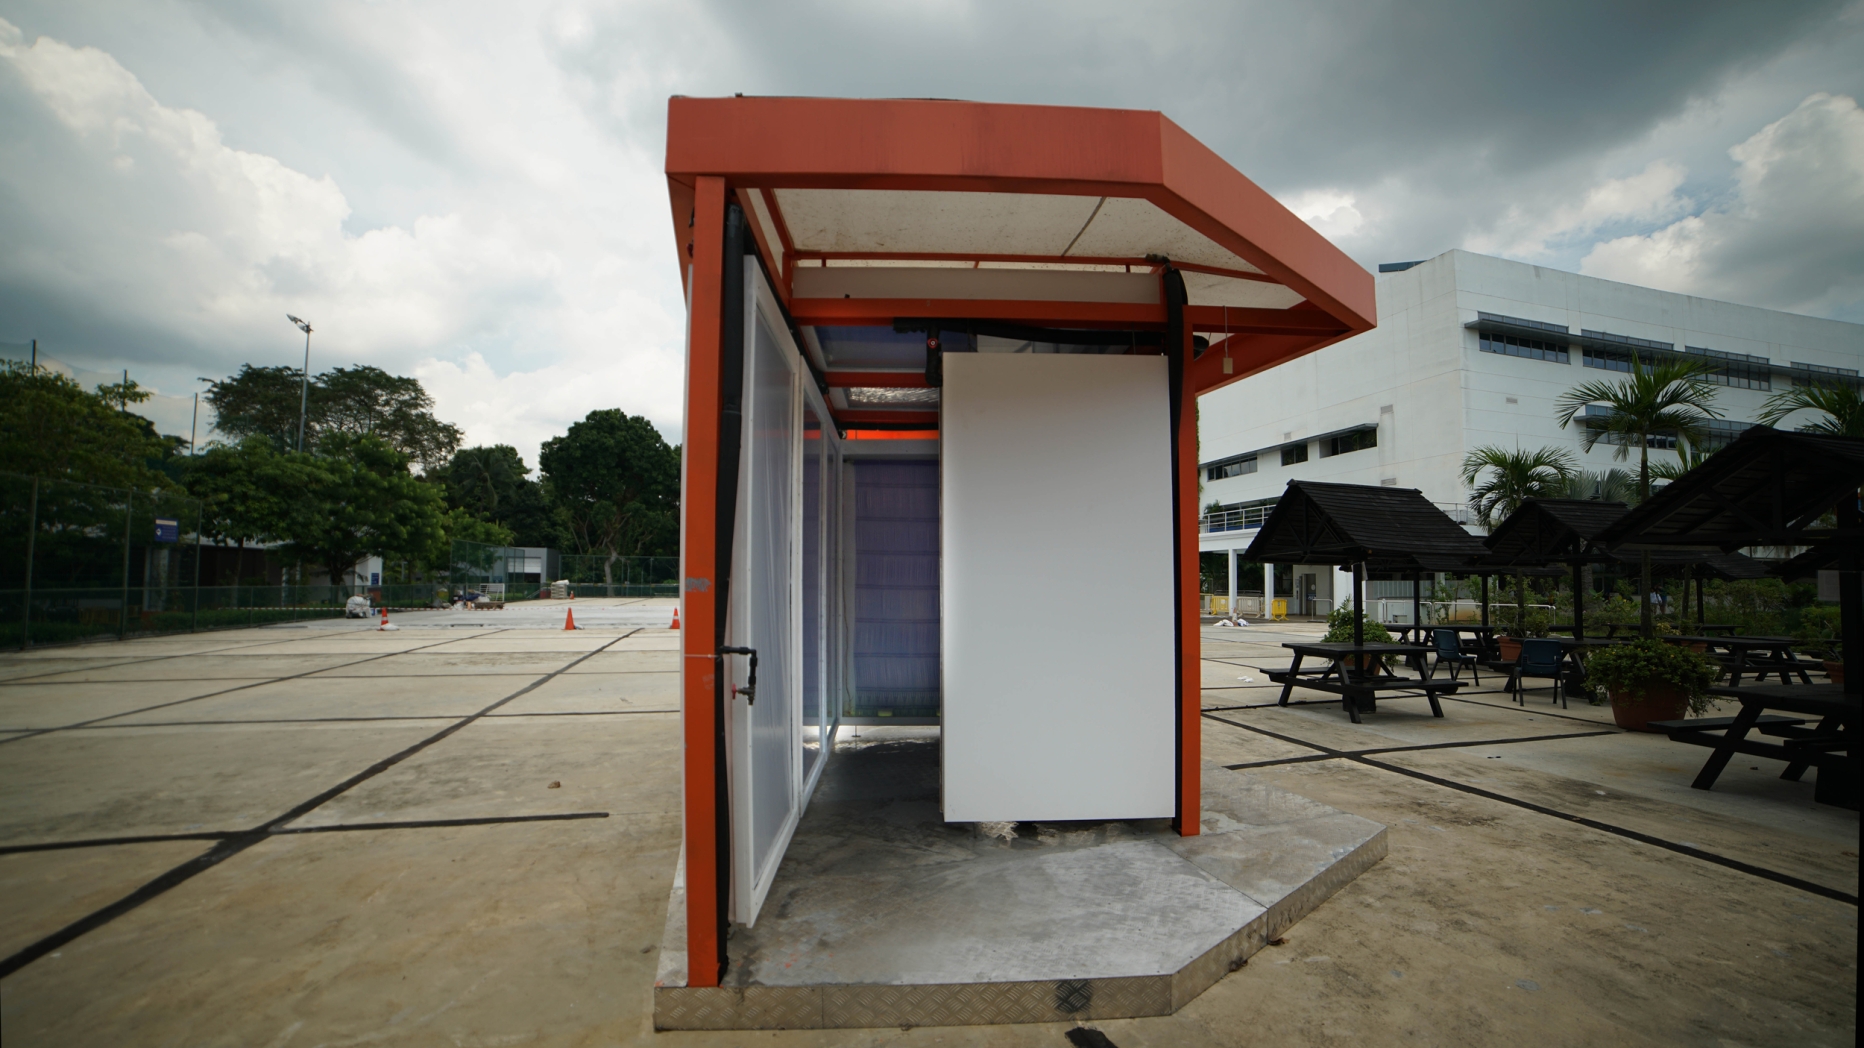 A radiant cooling pavilion with orange-painted steel frame and panelize walls in a site in Singapore